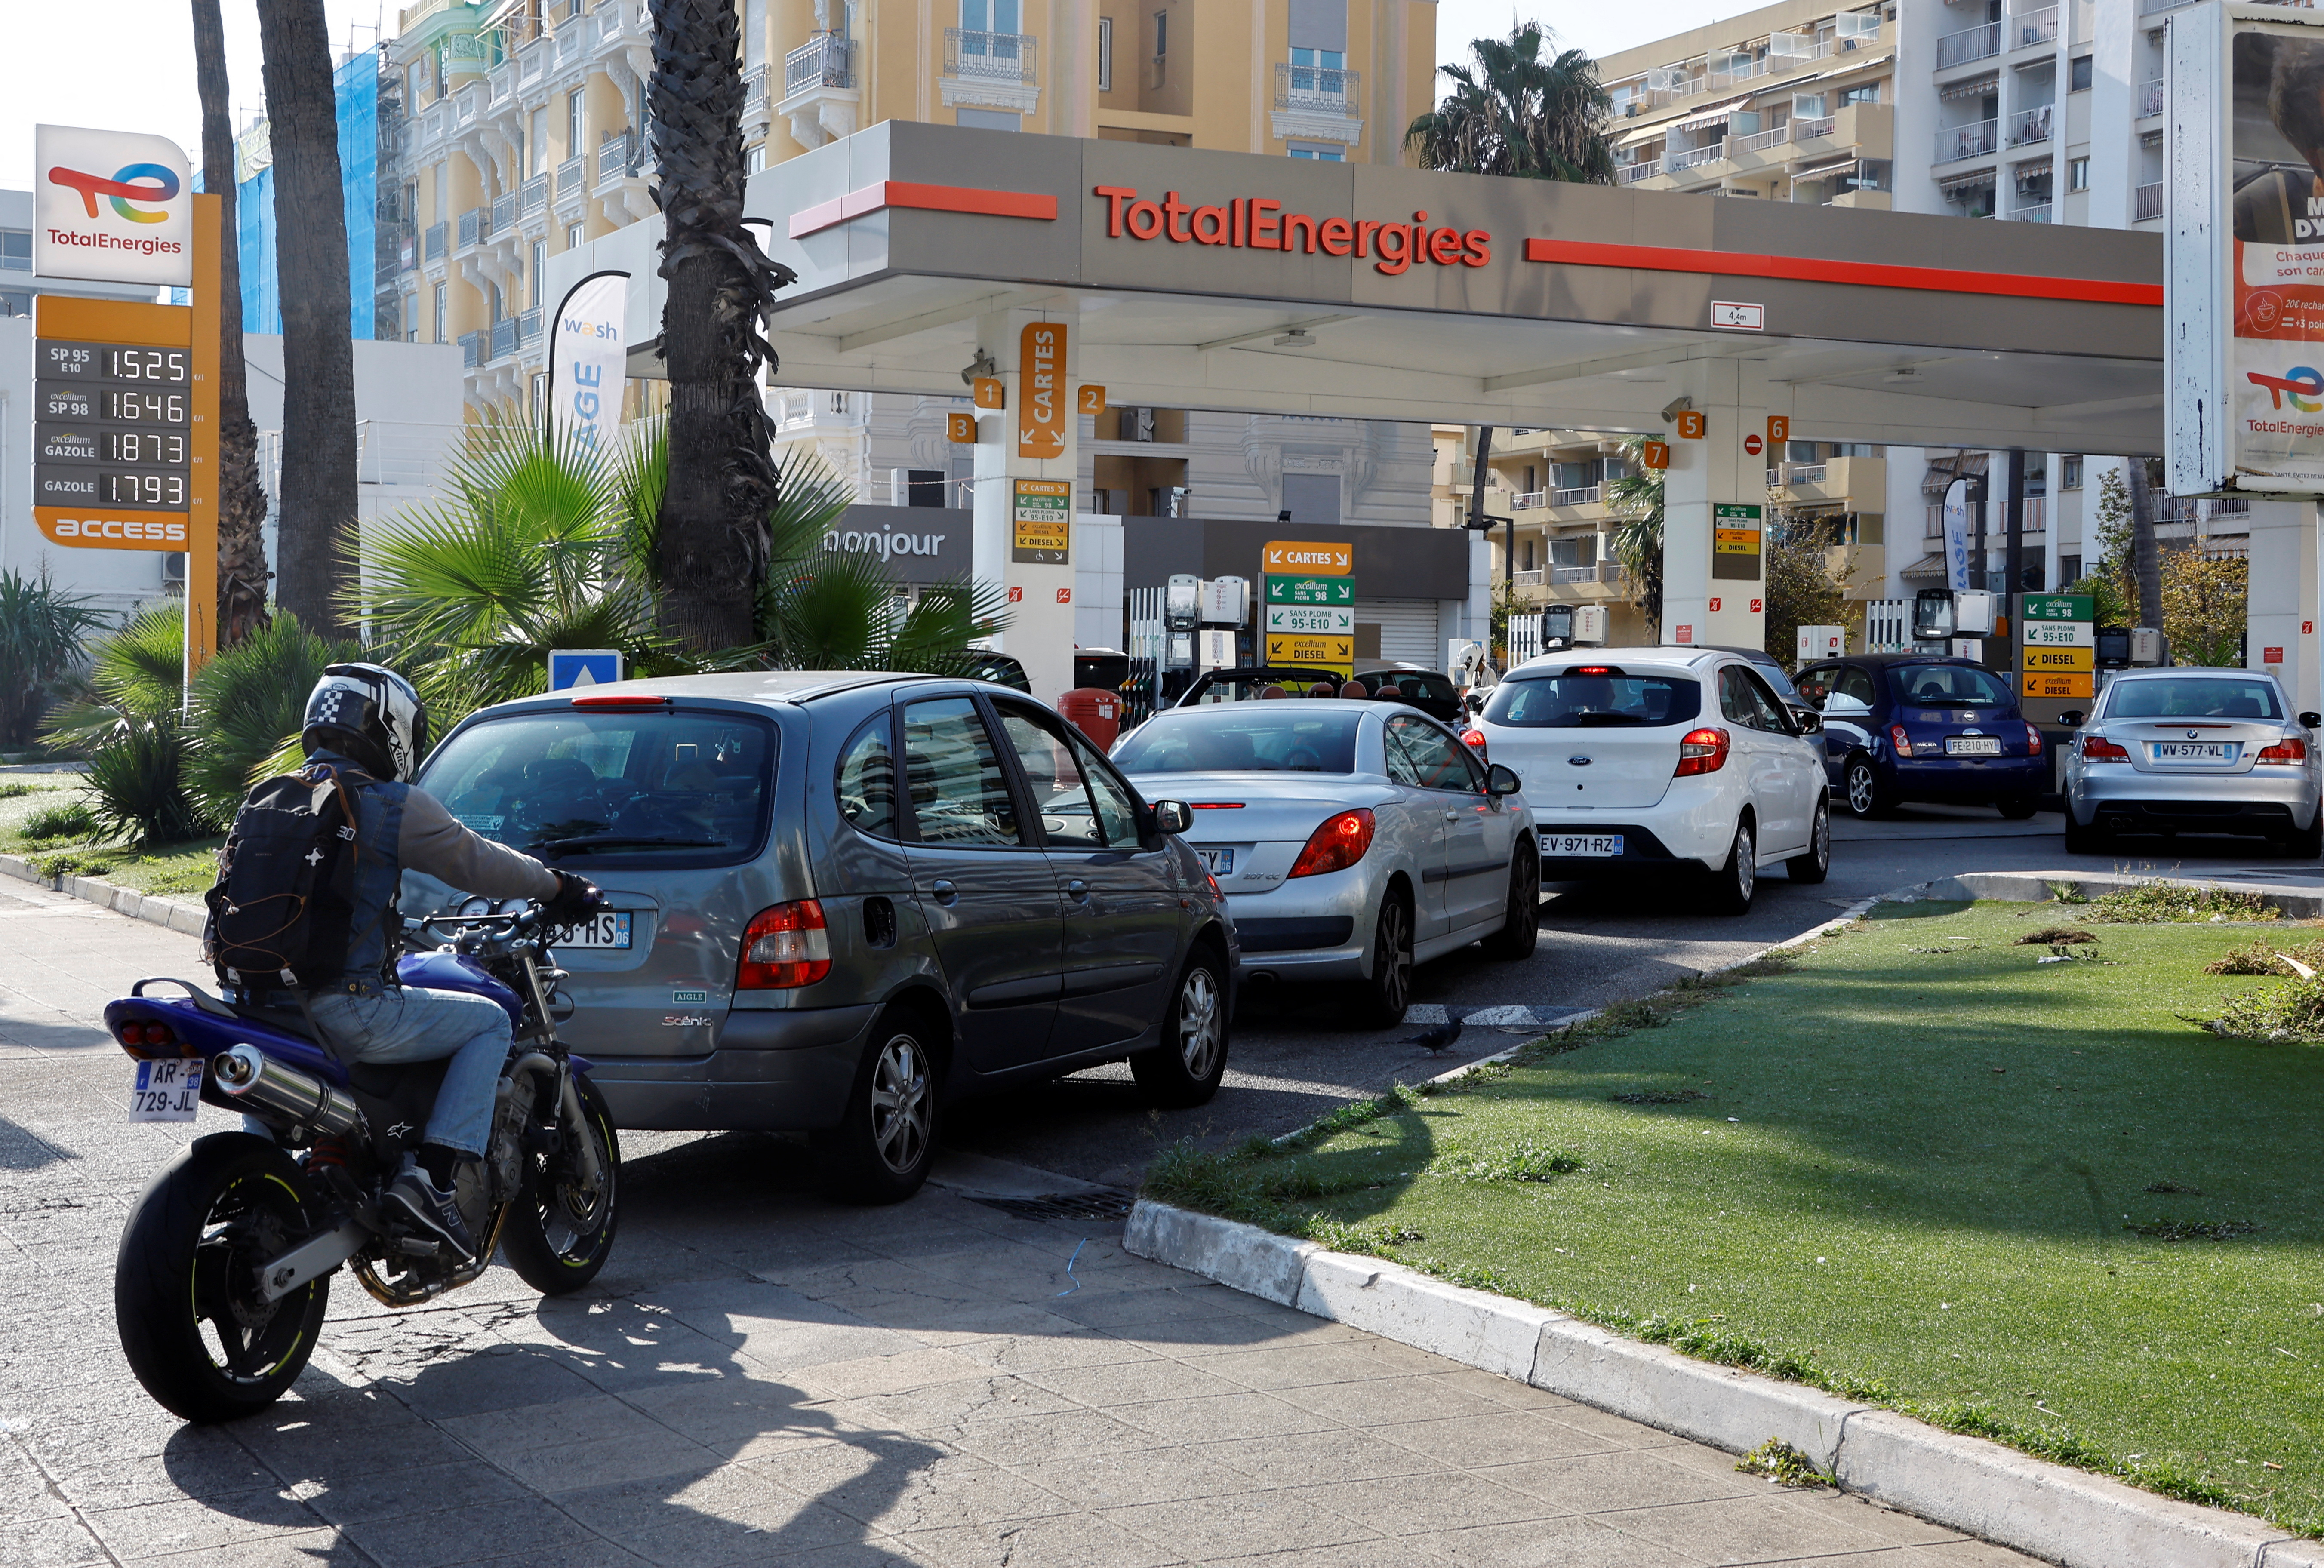 Car drivers queue to fill their fuel tank at a TotalEnergies gas station in Nice